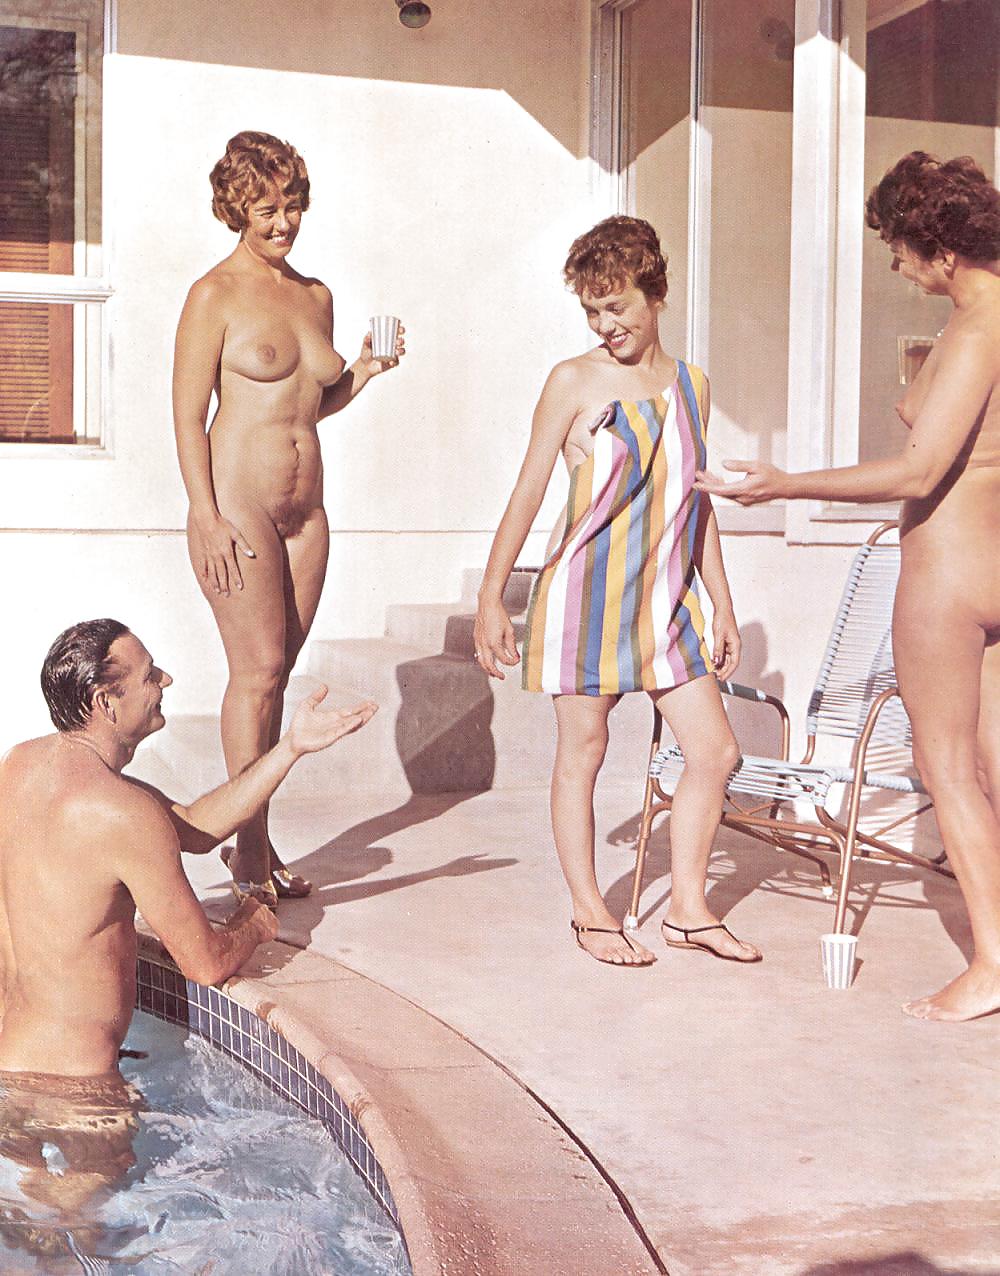 A Few Vintage Naturist Girls That Really Turn Me On (3) #16485432